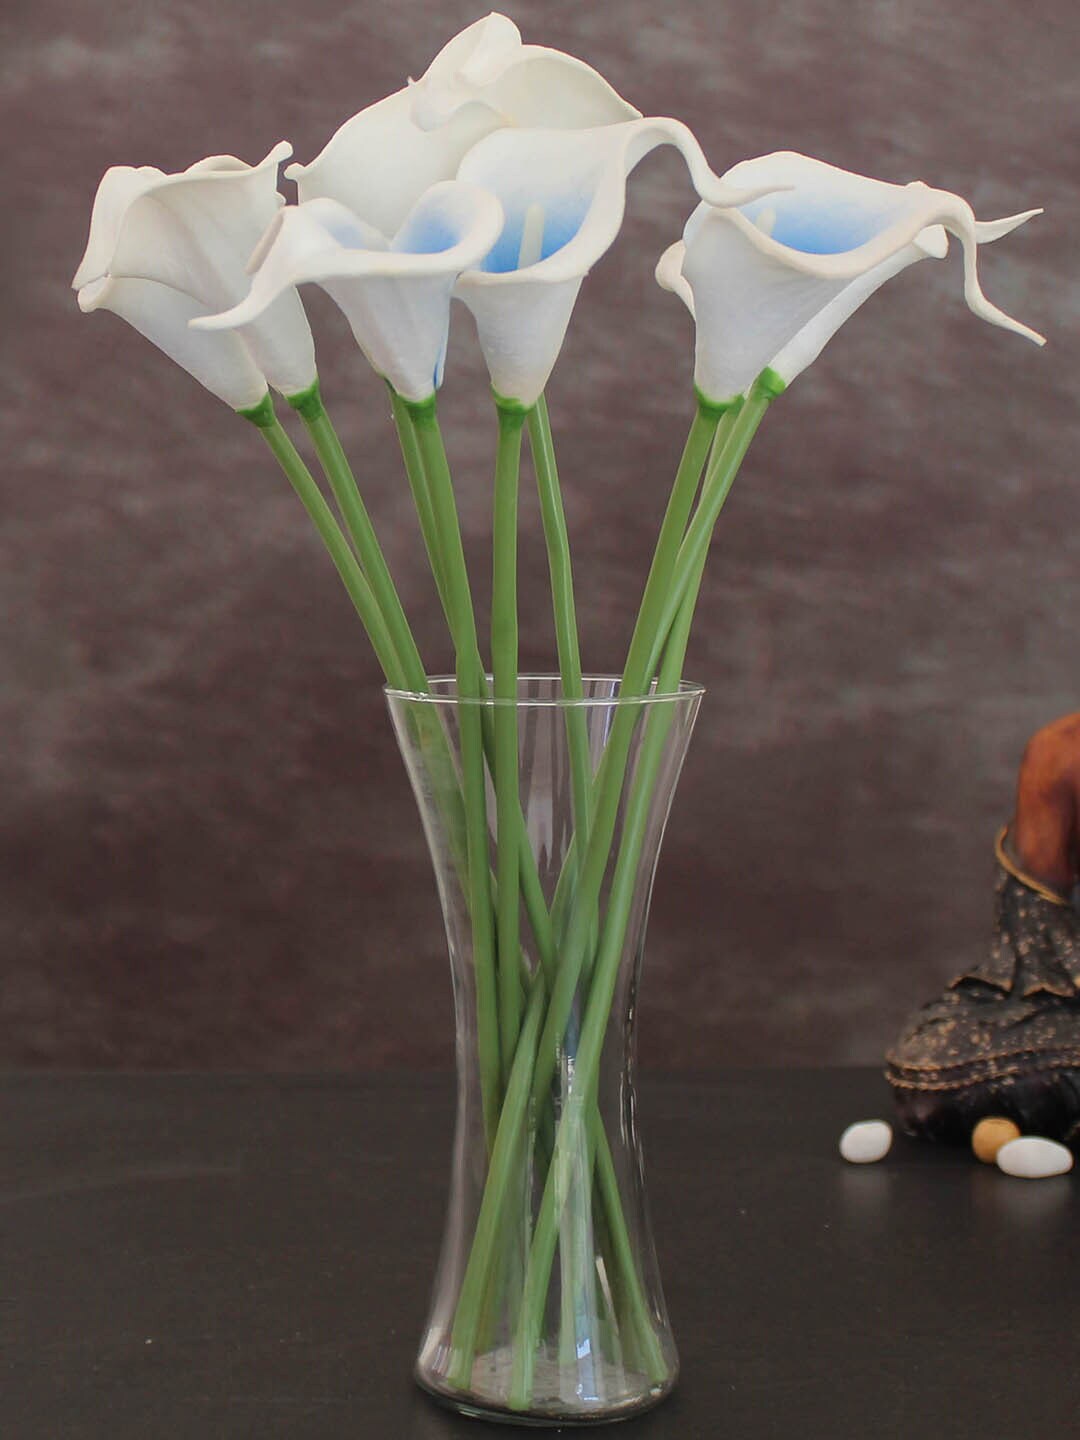 TIED RIBBONS Set of 10 White & Blue Calla Lily Flower Sticks with Vase Pot Price in India